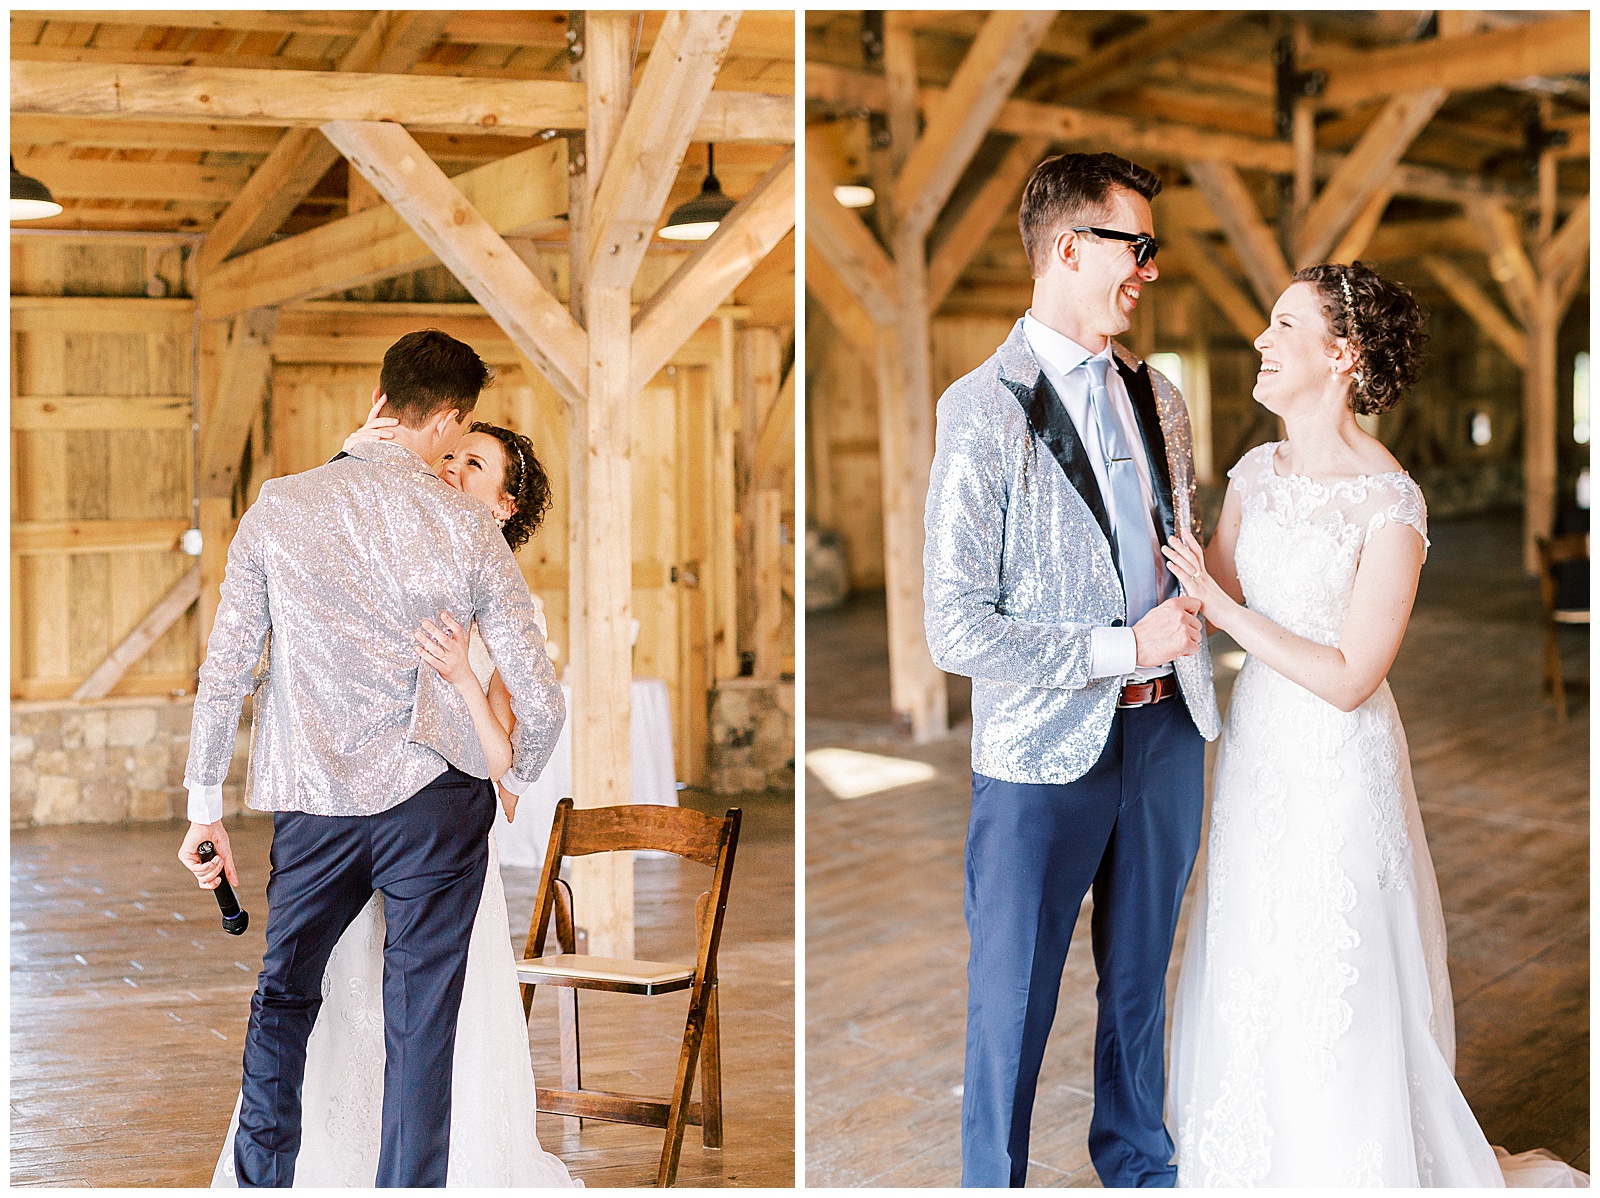 groom performs hilarious surprise song for bride in wooden open barn wedding venue